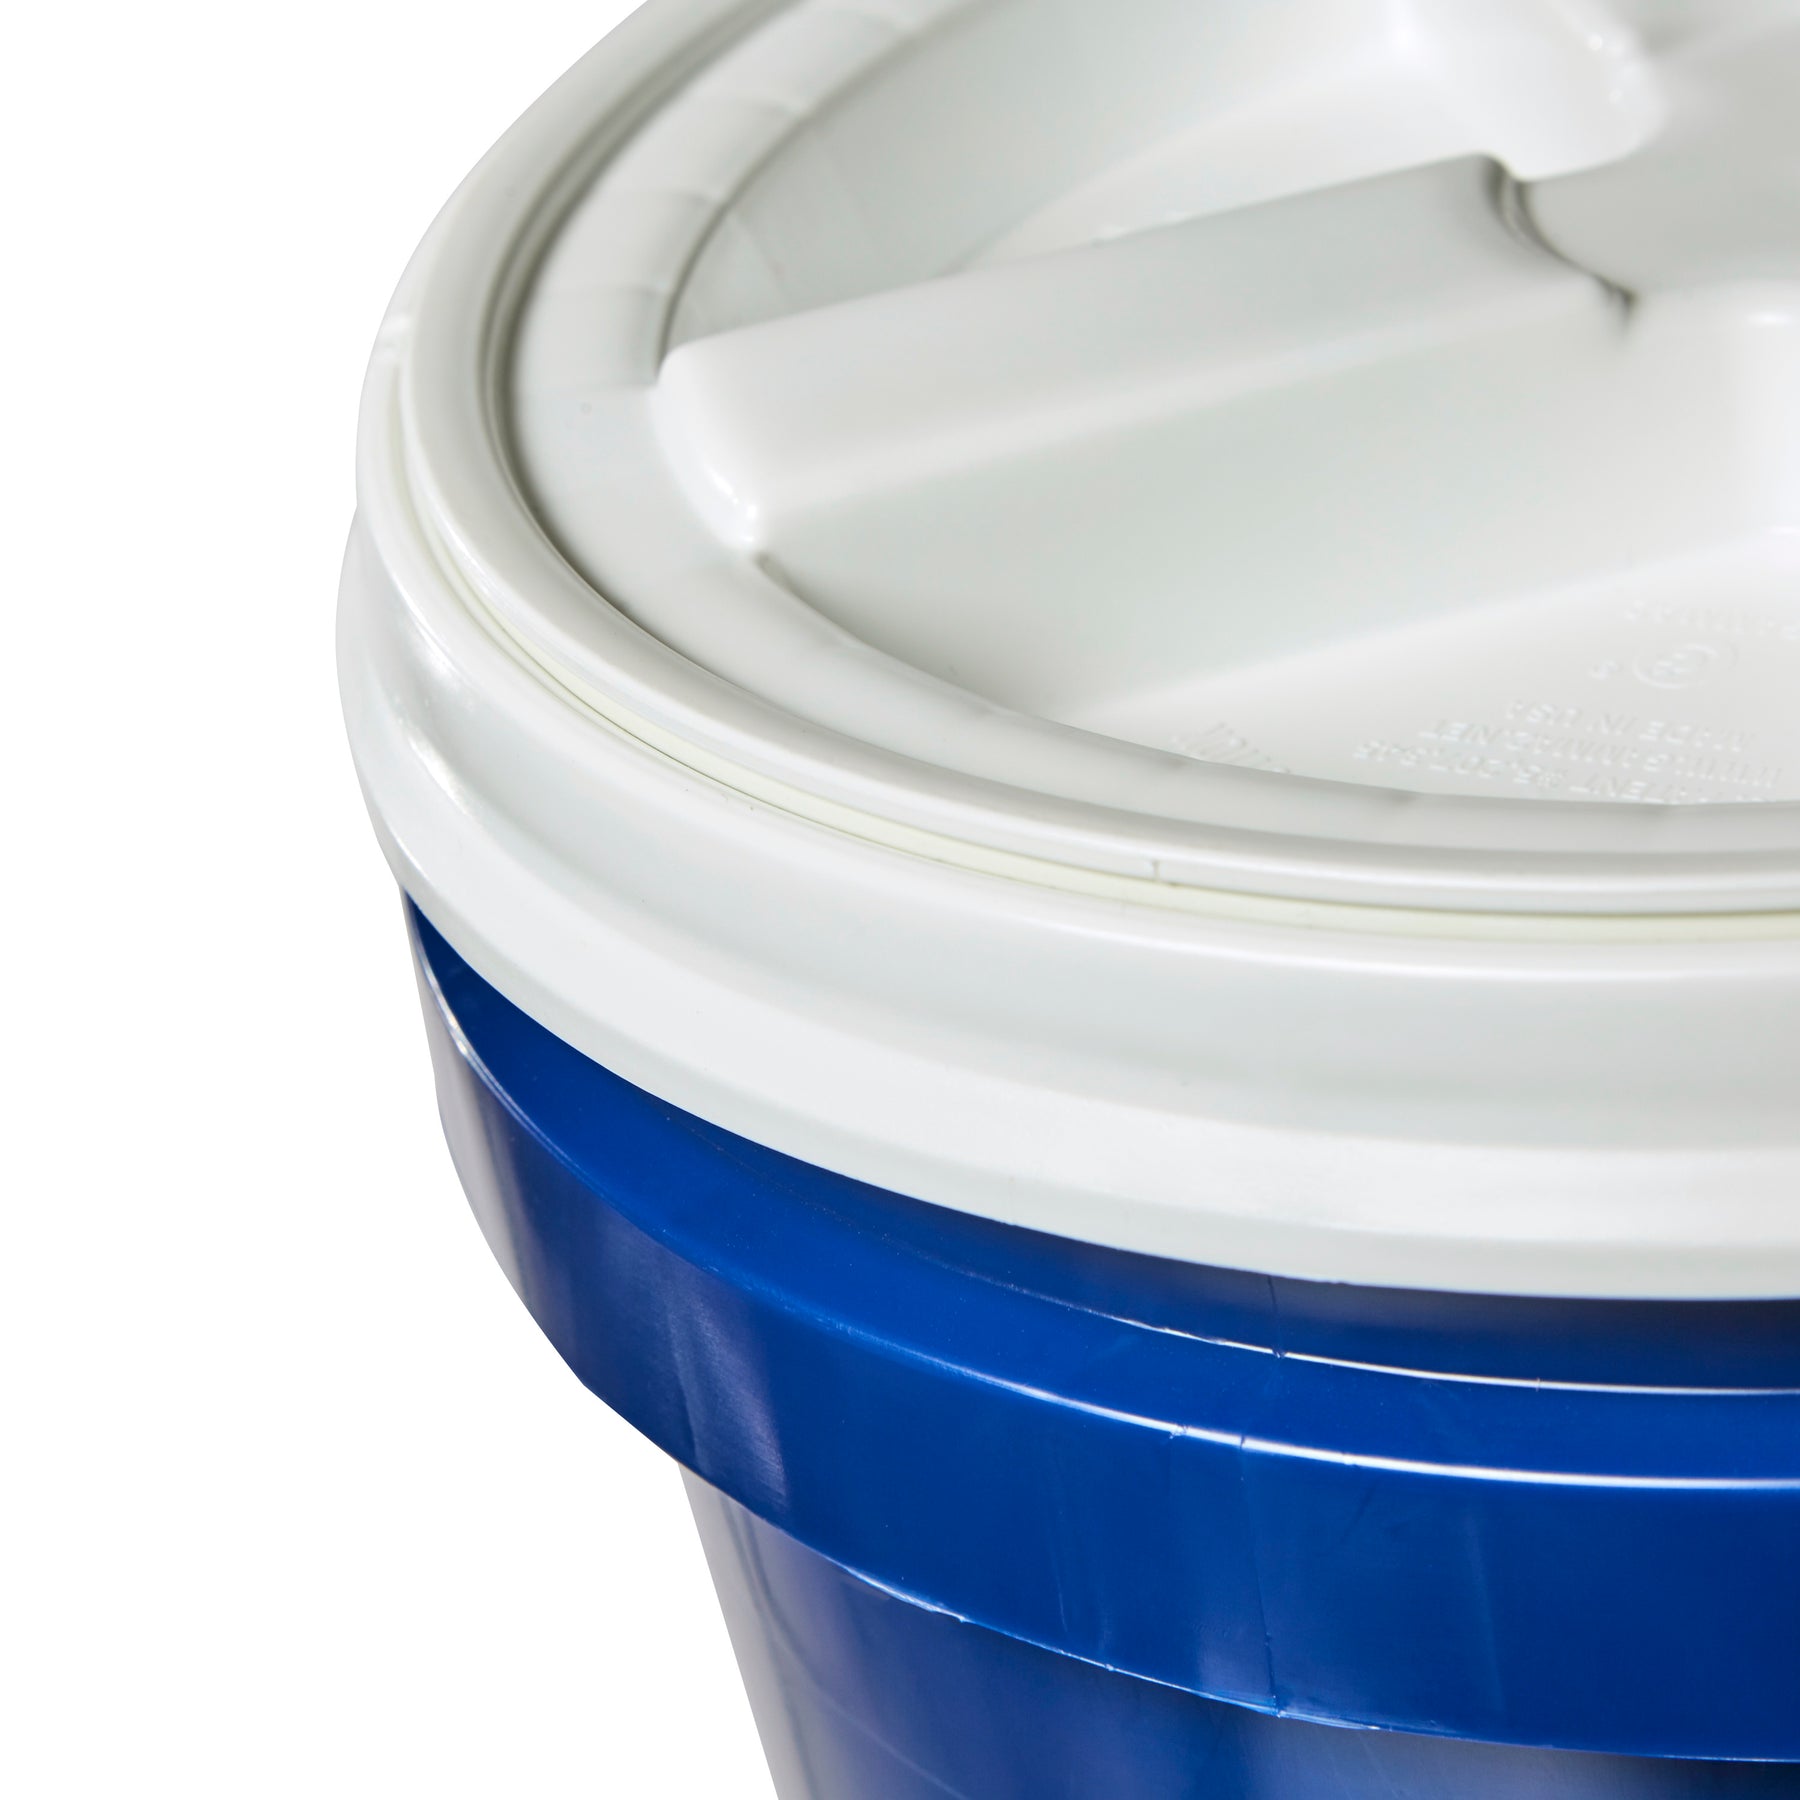 2 Gallon White Bucket With Gamma Seal Lid <br><font color=red